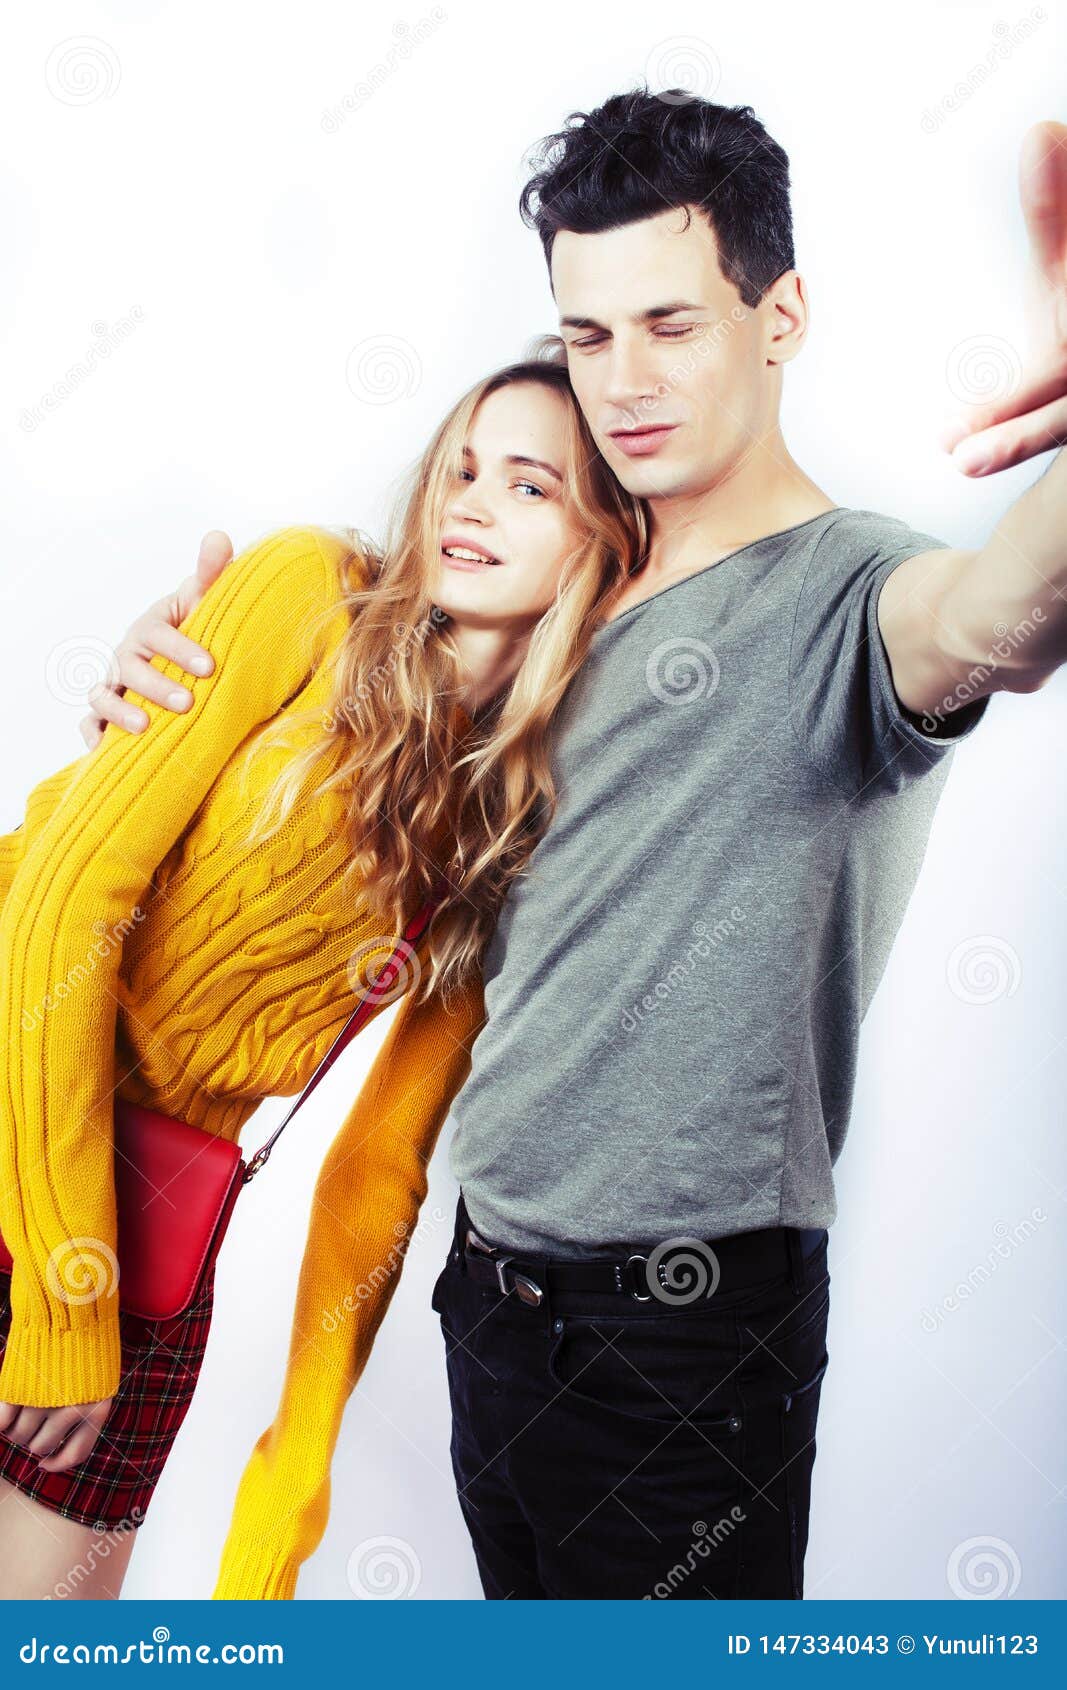 Best Friends Teenage Couple Girl And Boy Together Having Fun Posing Emotional On White Background Couple Happy Smiling Stock Image Image Of Posing Happy